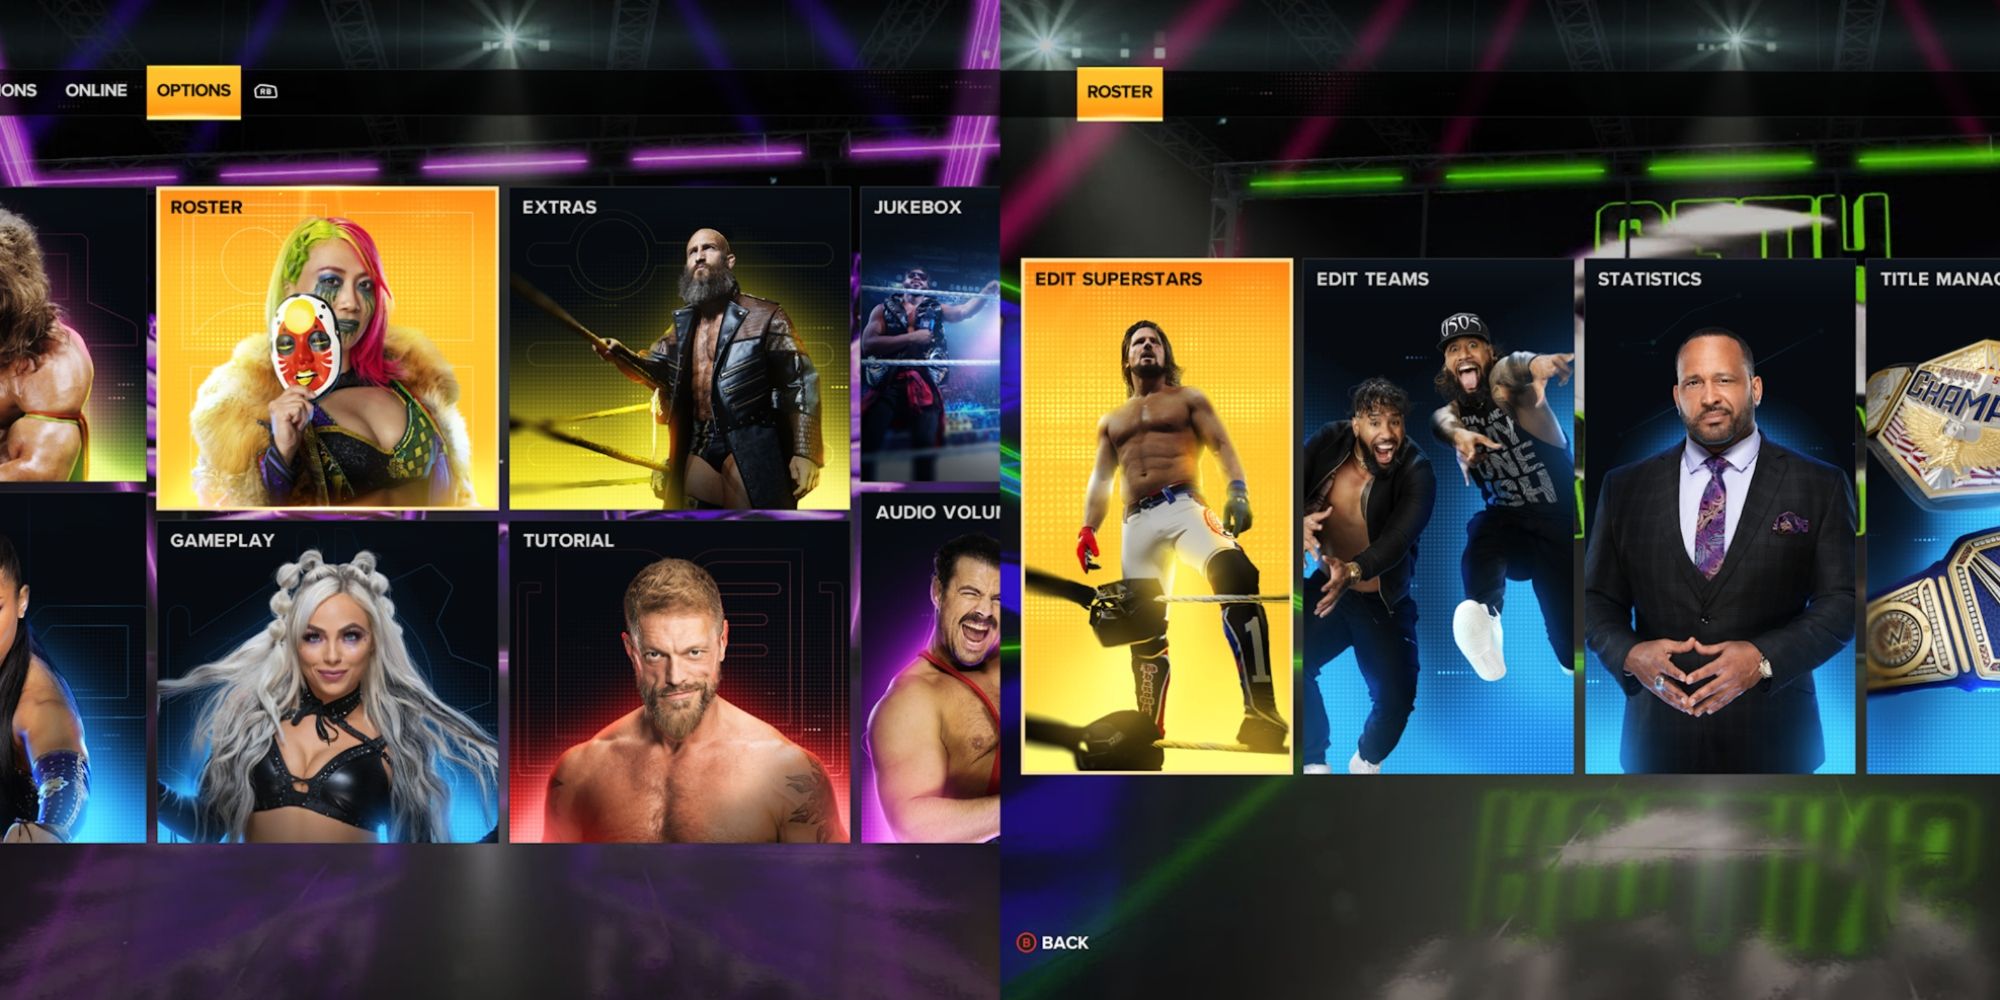 How To Alter A Superstar's Overall Rating In WWE 2K23